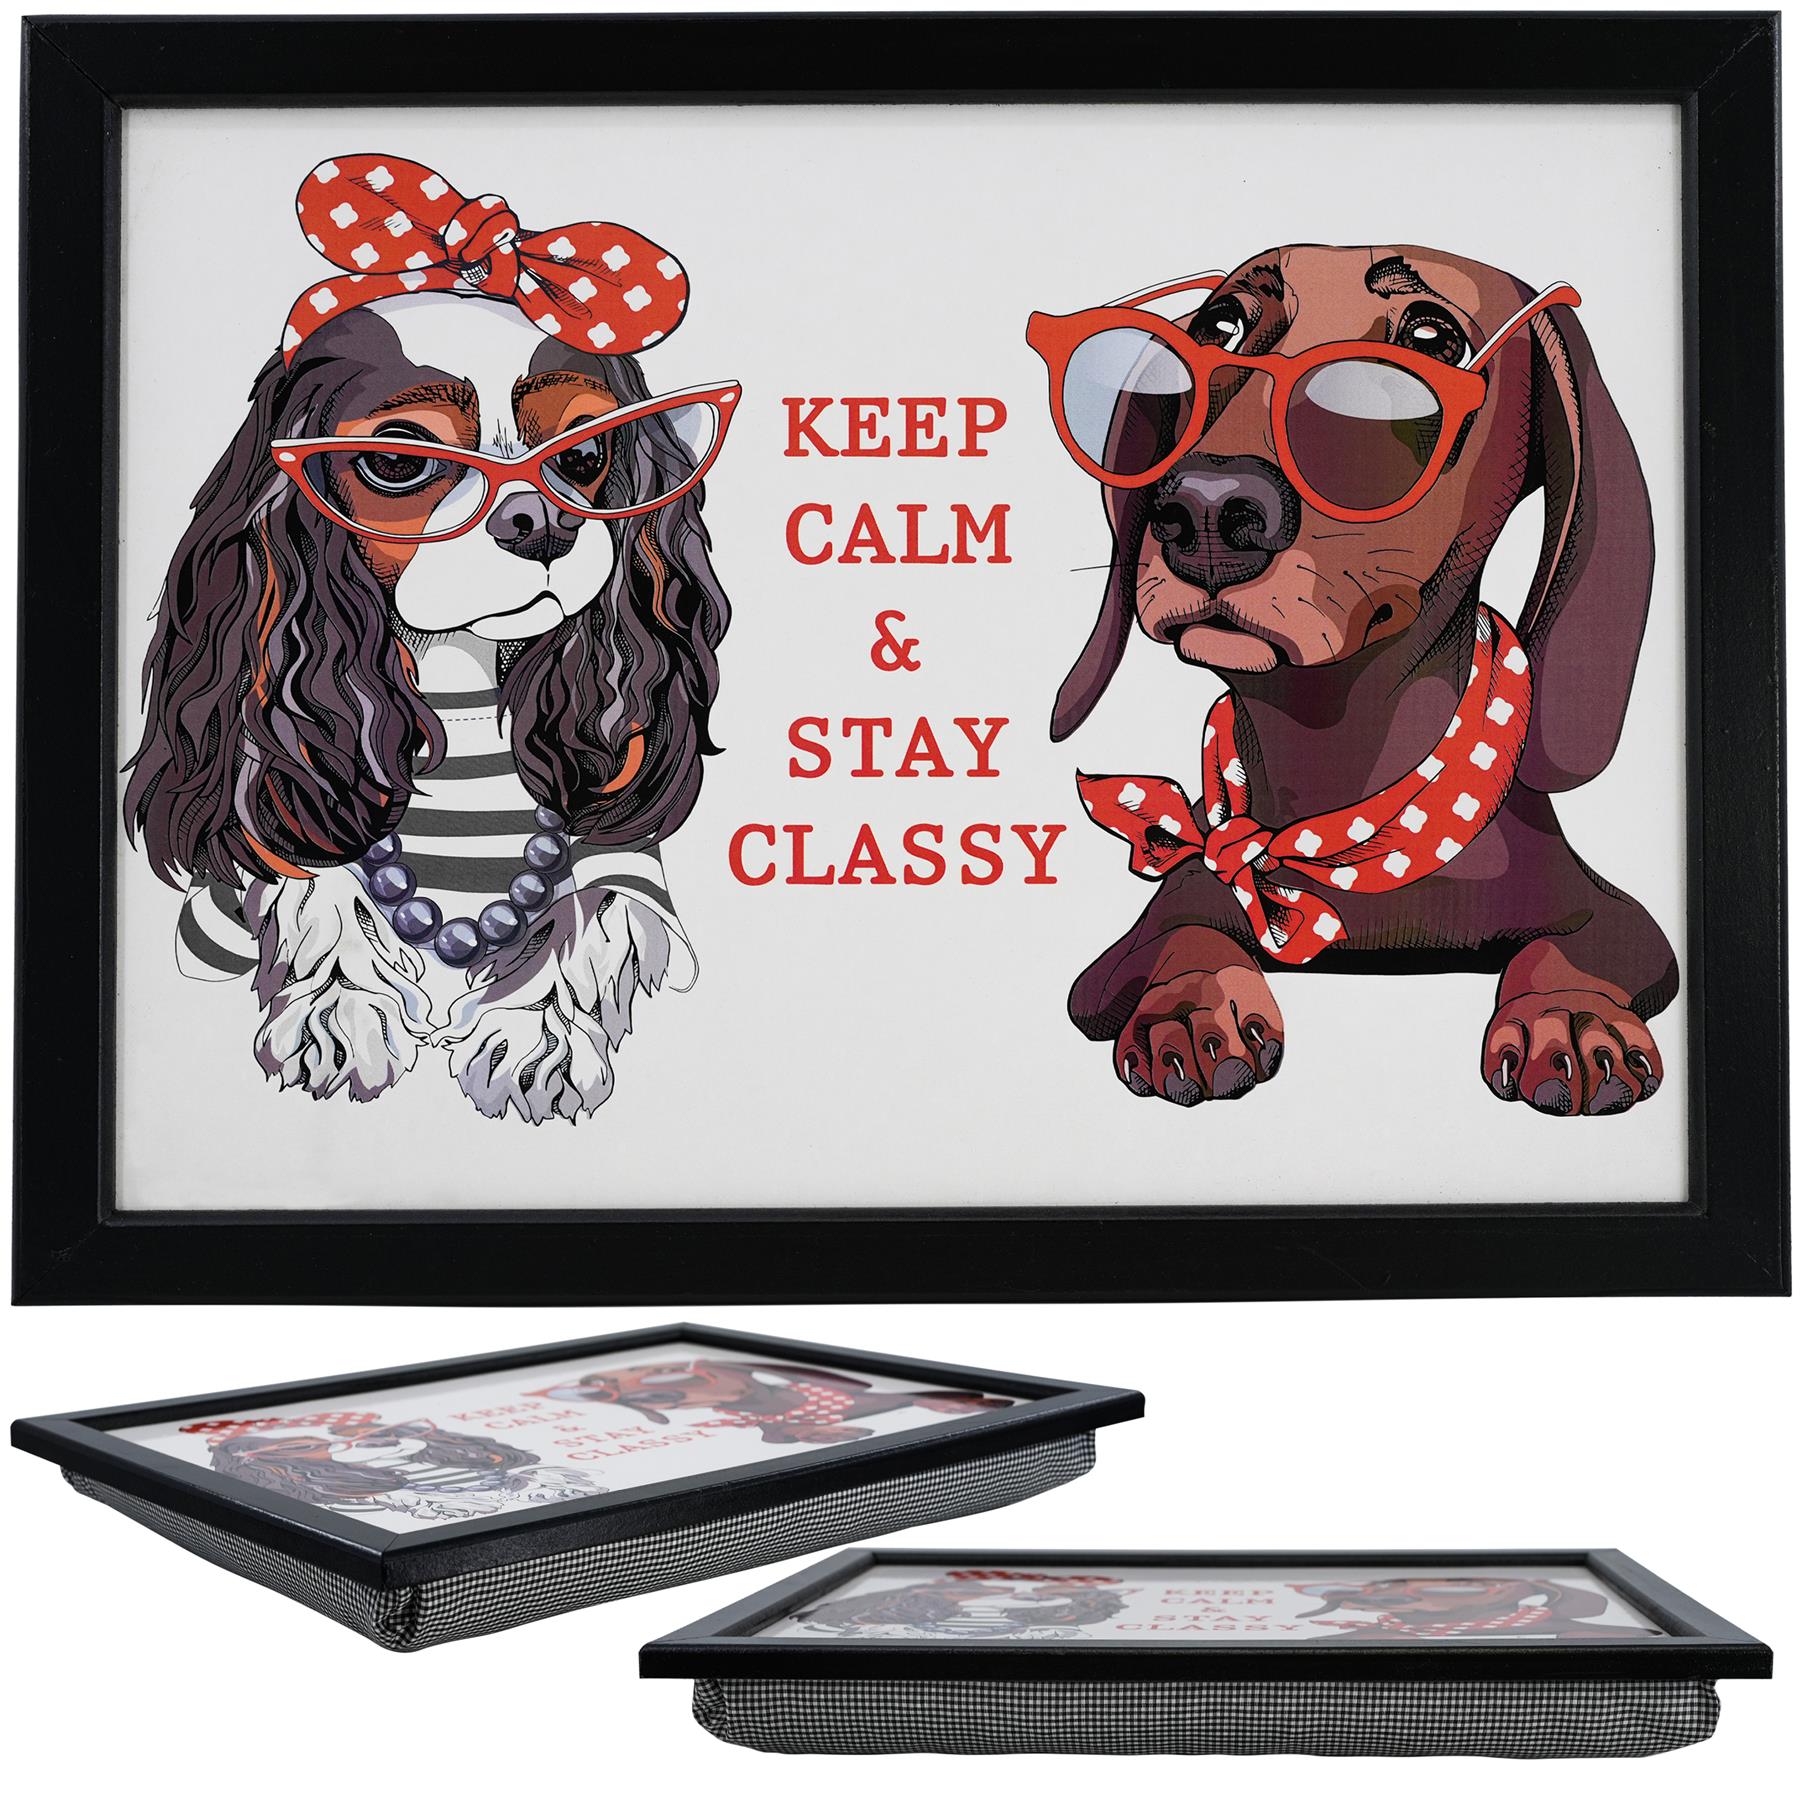 Keep Calm Lap Tray With Bean Bag Cushion by Geezy - UKBuyZone